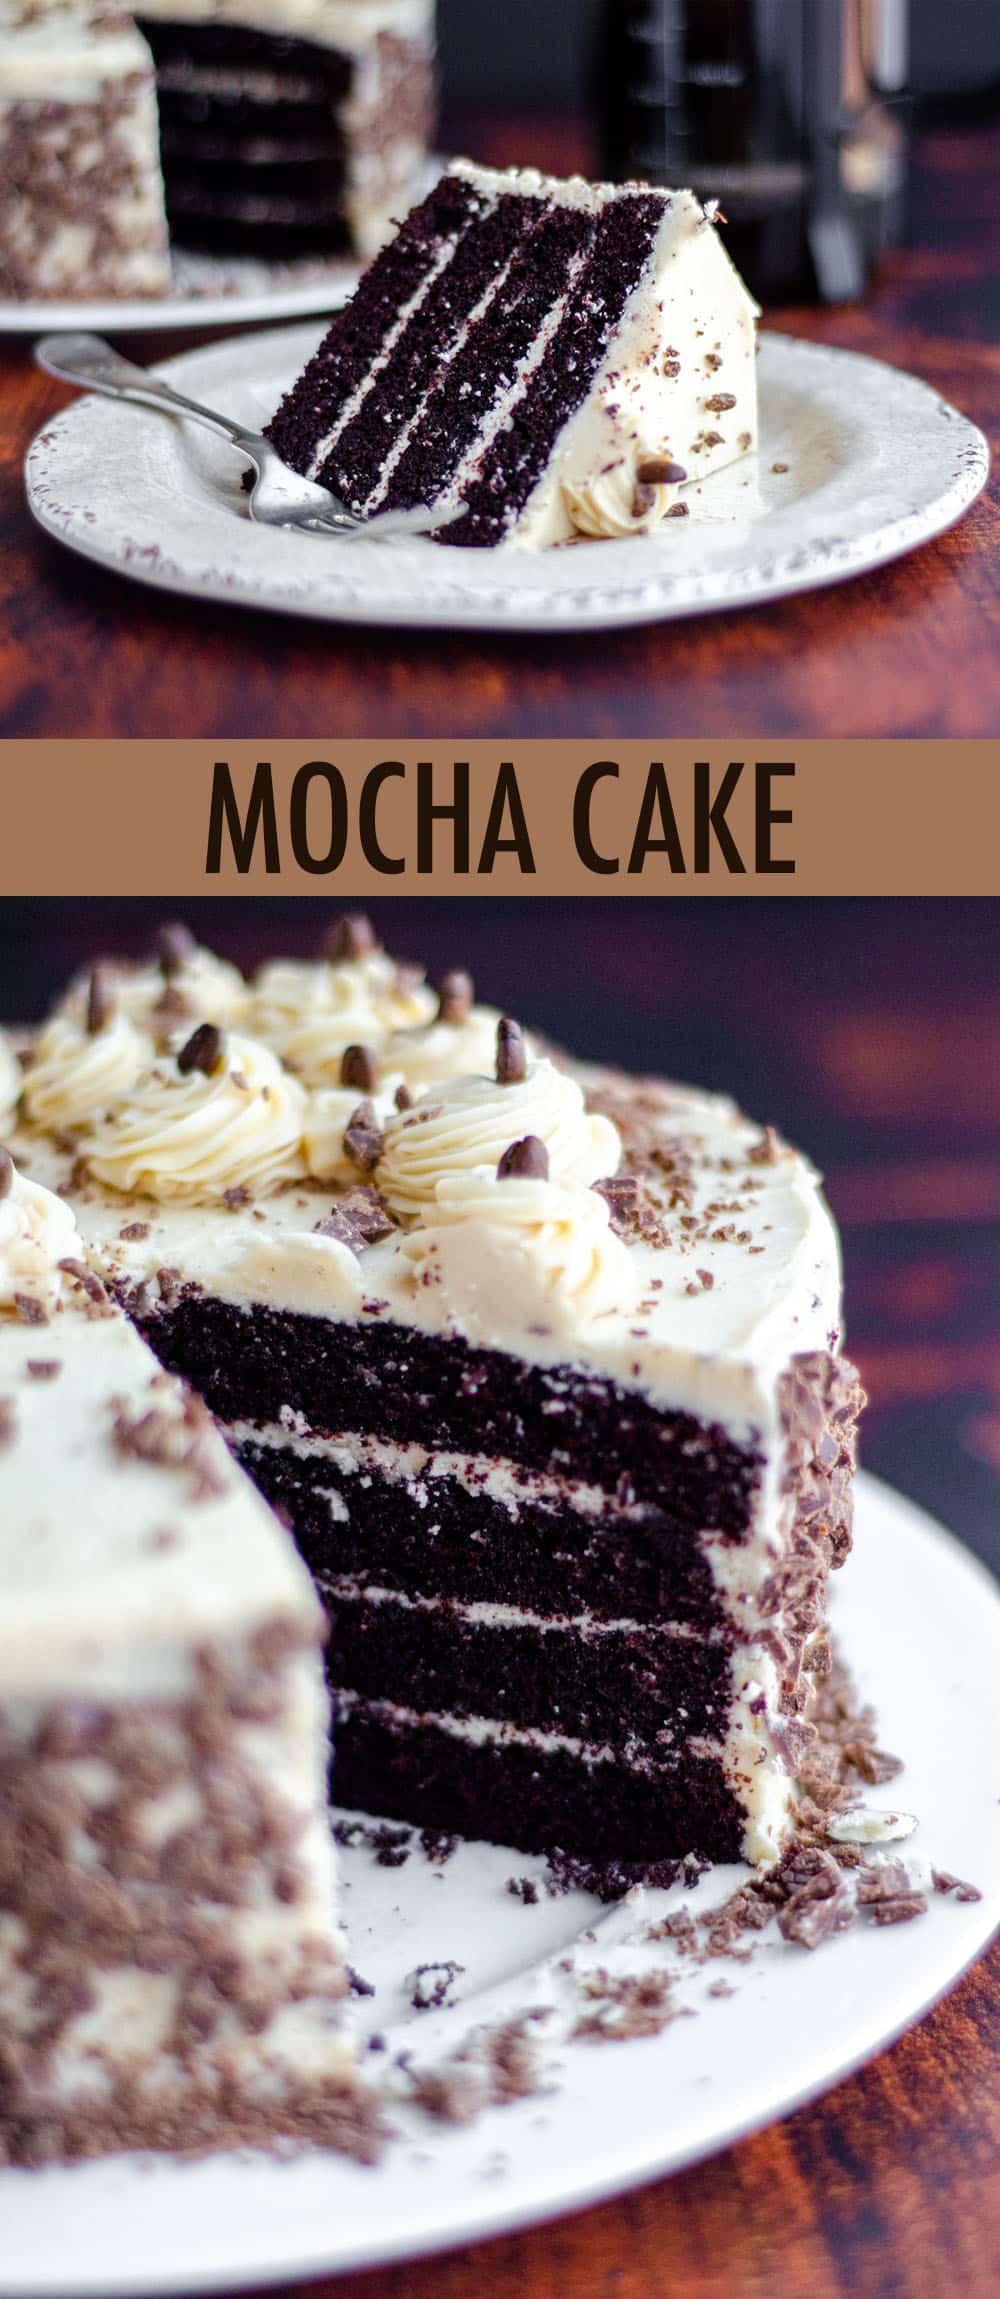 Rich chocolate cake flavored with coffee and topped with a creamy coffee buttercream.  via @frshaprilflours